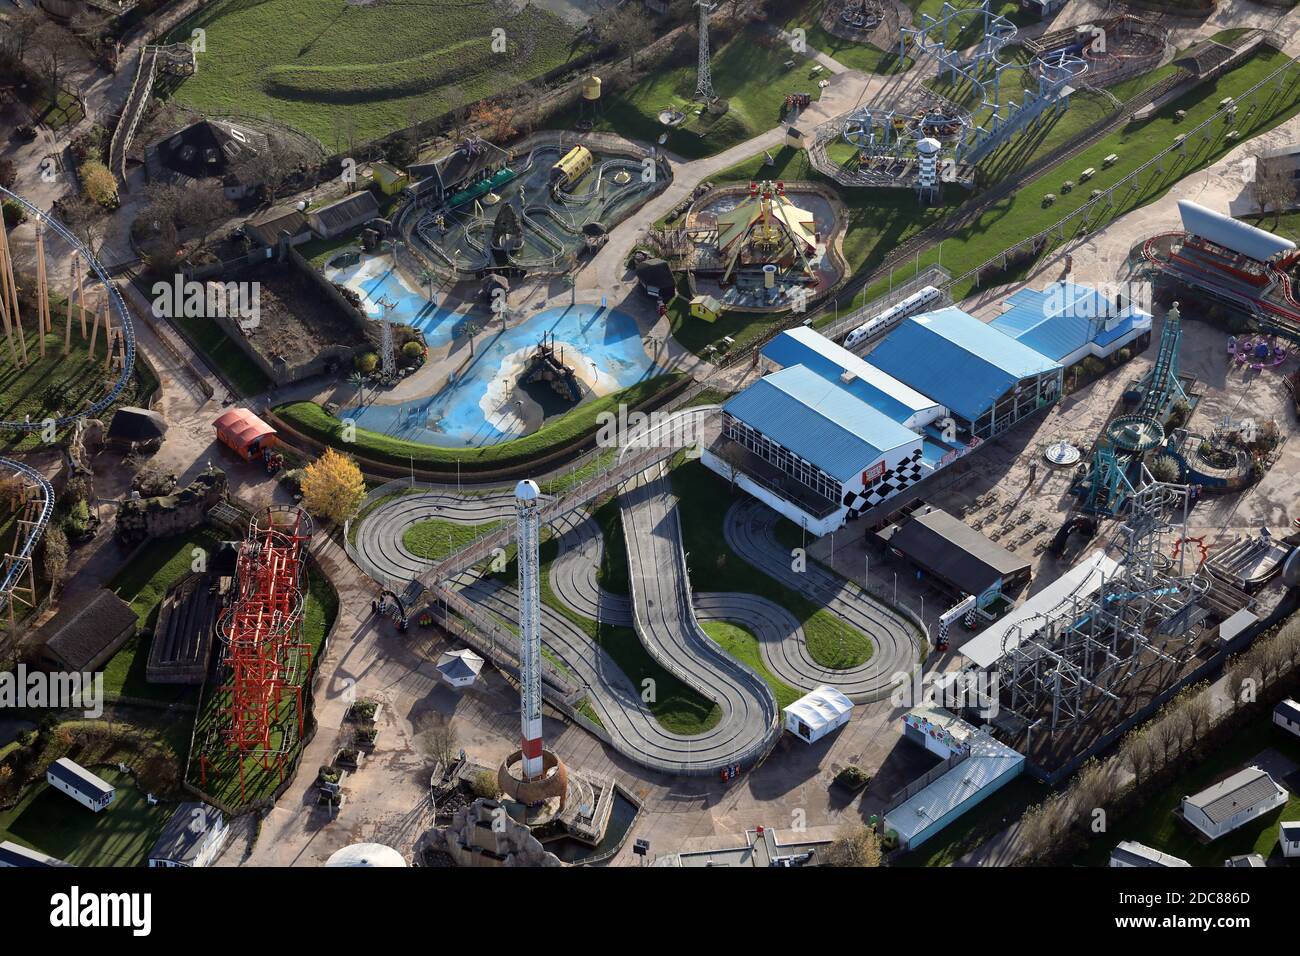 aerial view of the Flamingo Land Resort at Kirby Misperton near Pickering in North Yorkshire, UK Stock Photo